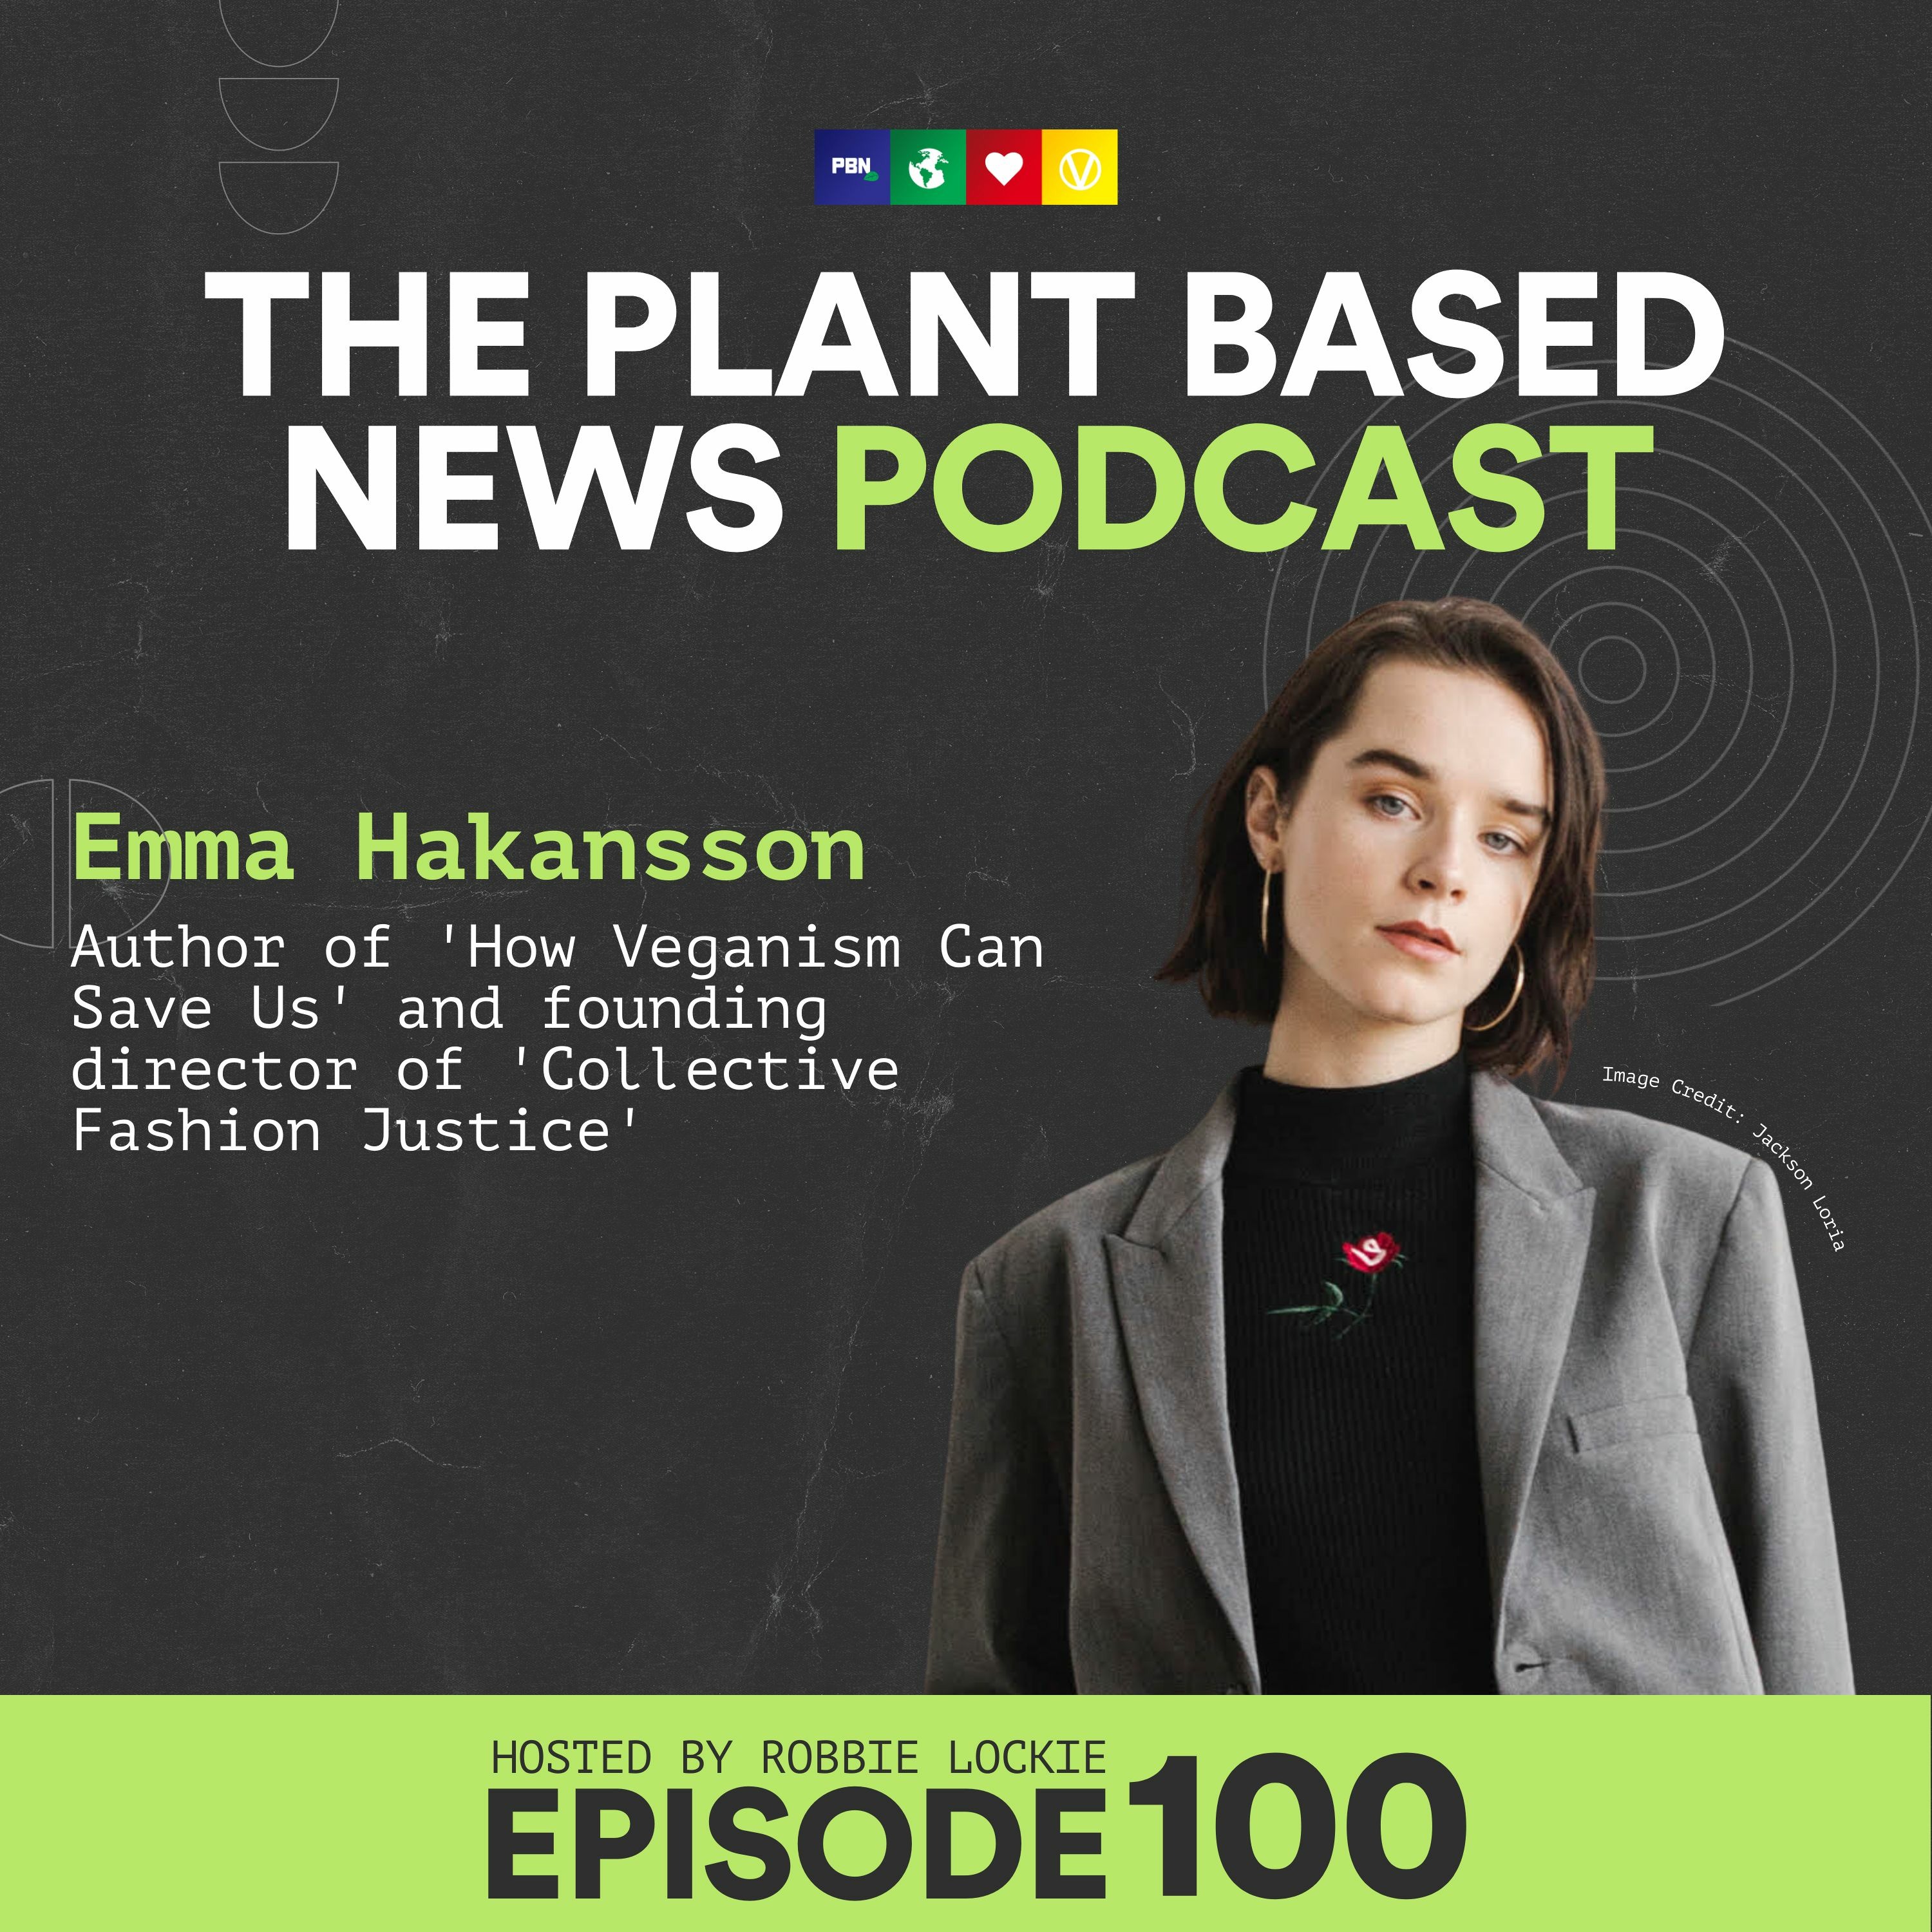 Emma Hakansson On The Horrors Of Animal Use In The Fashion Industry